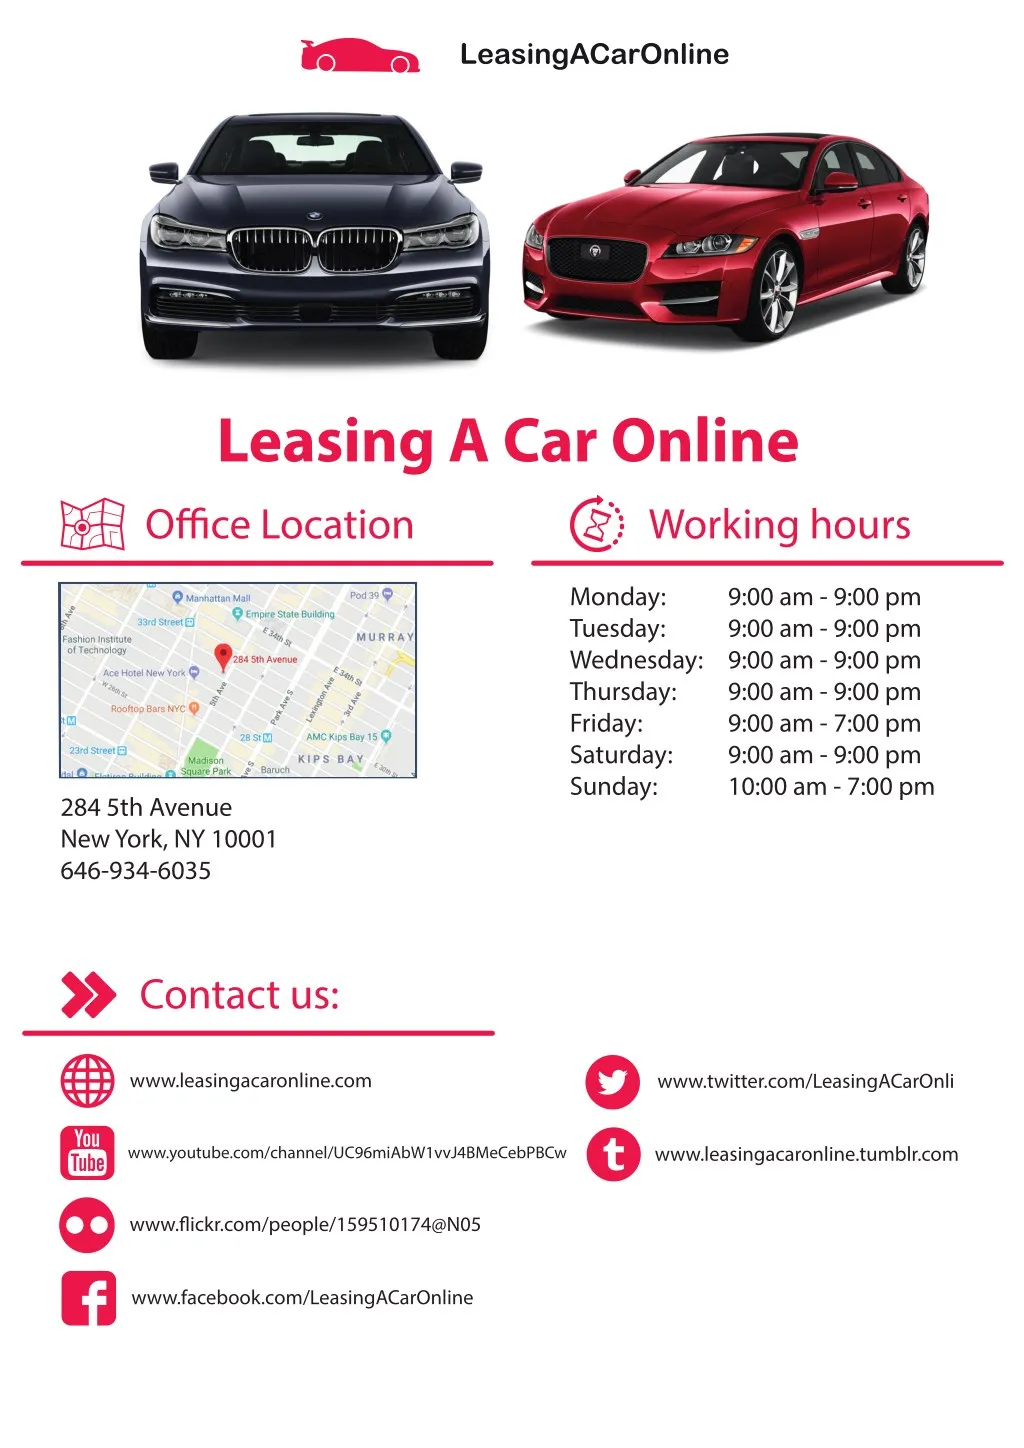 leasing a car online ofce location https